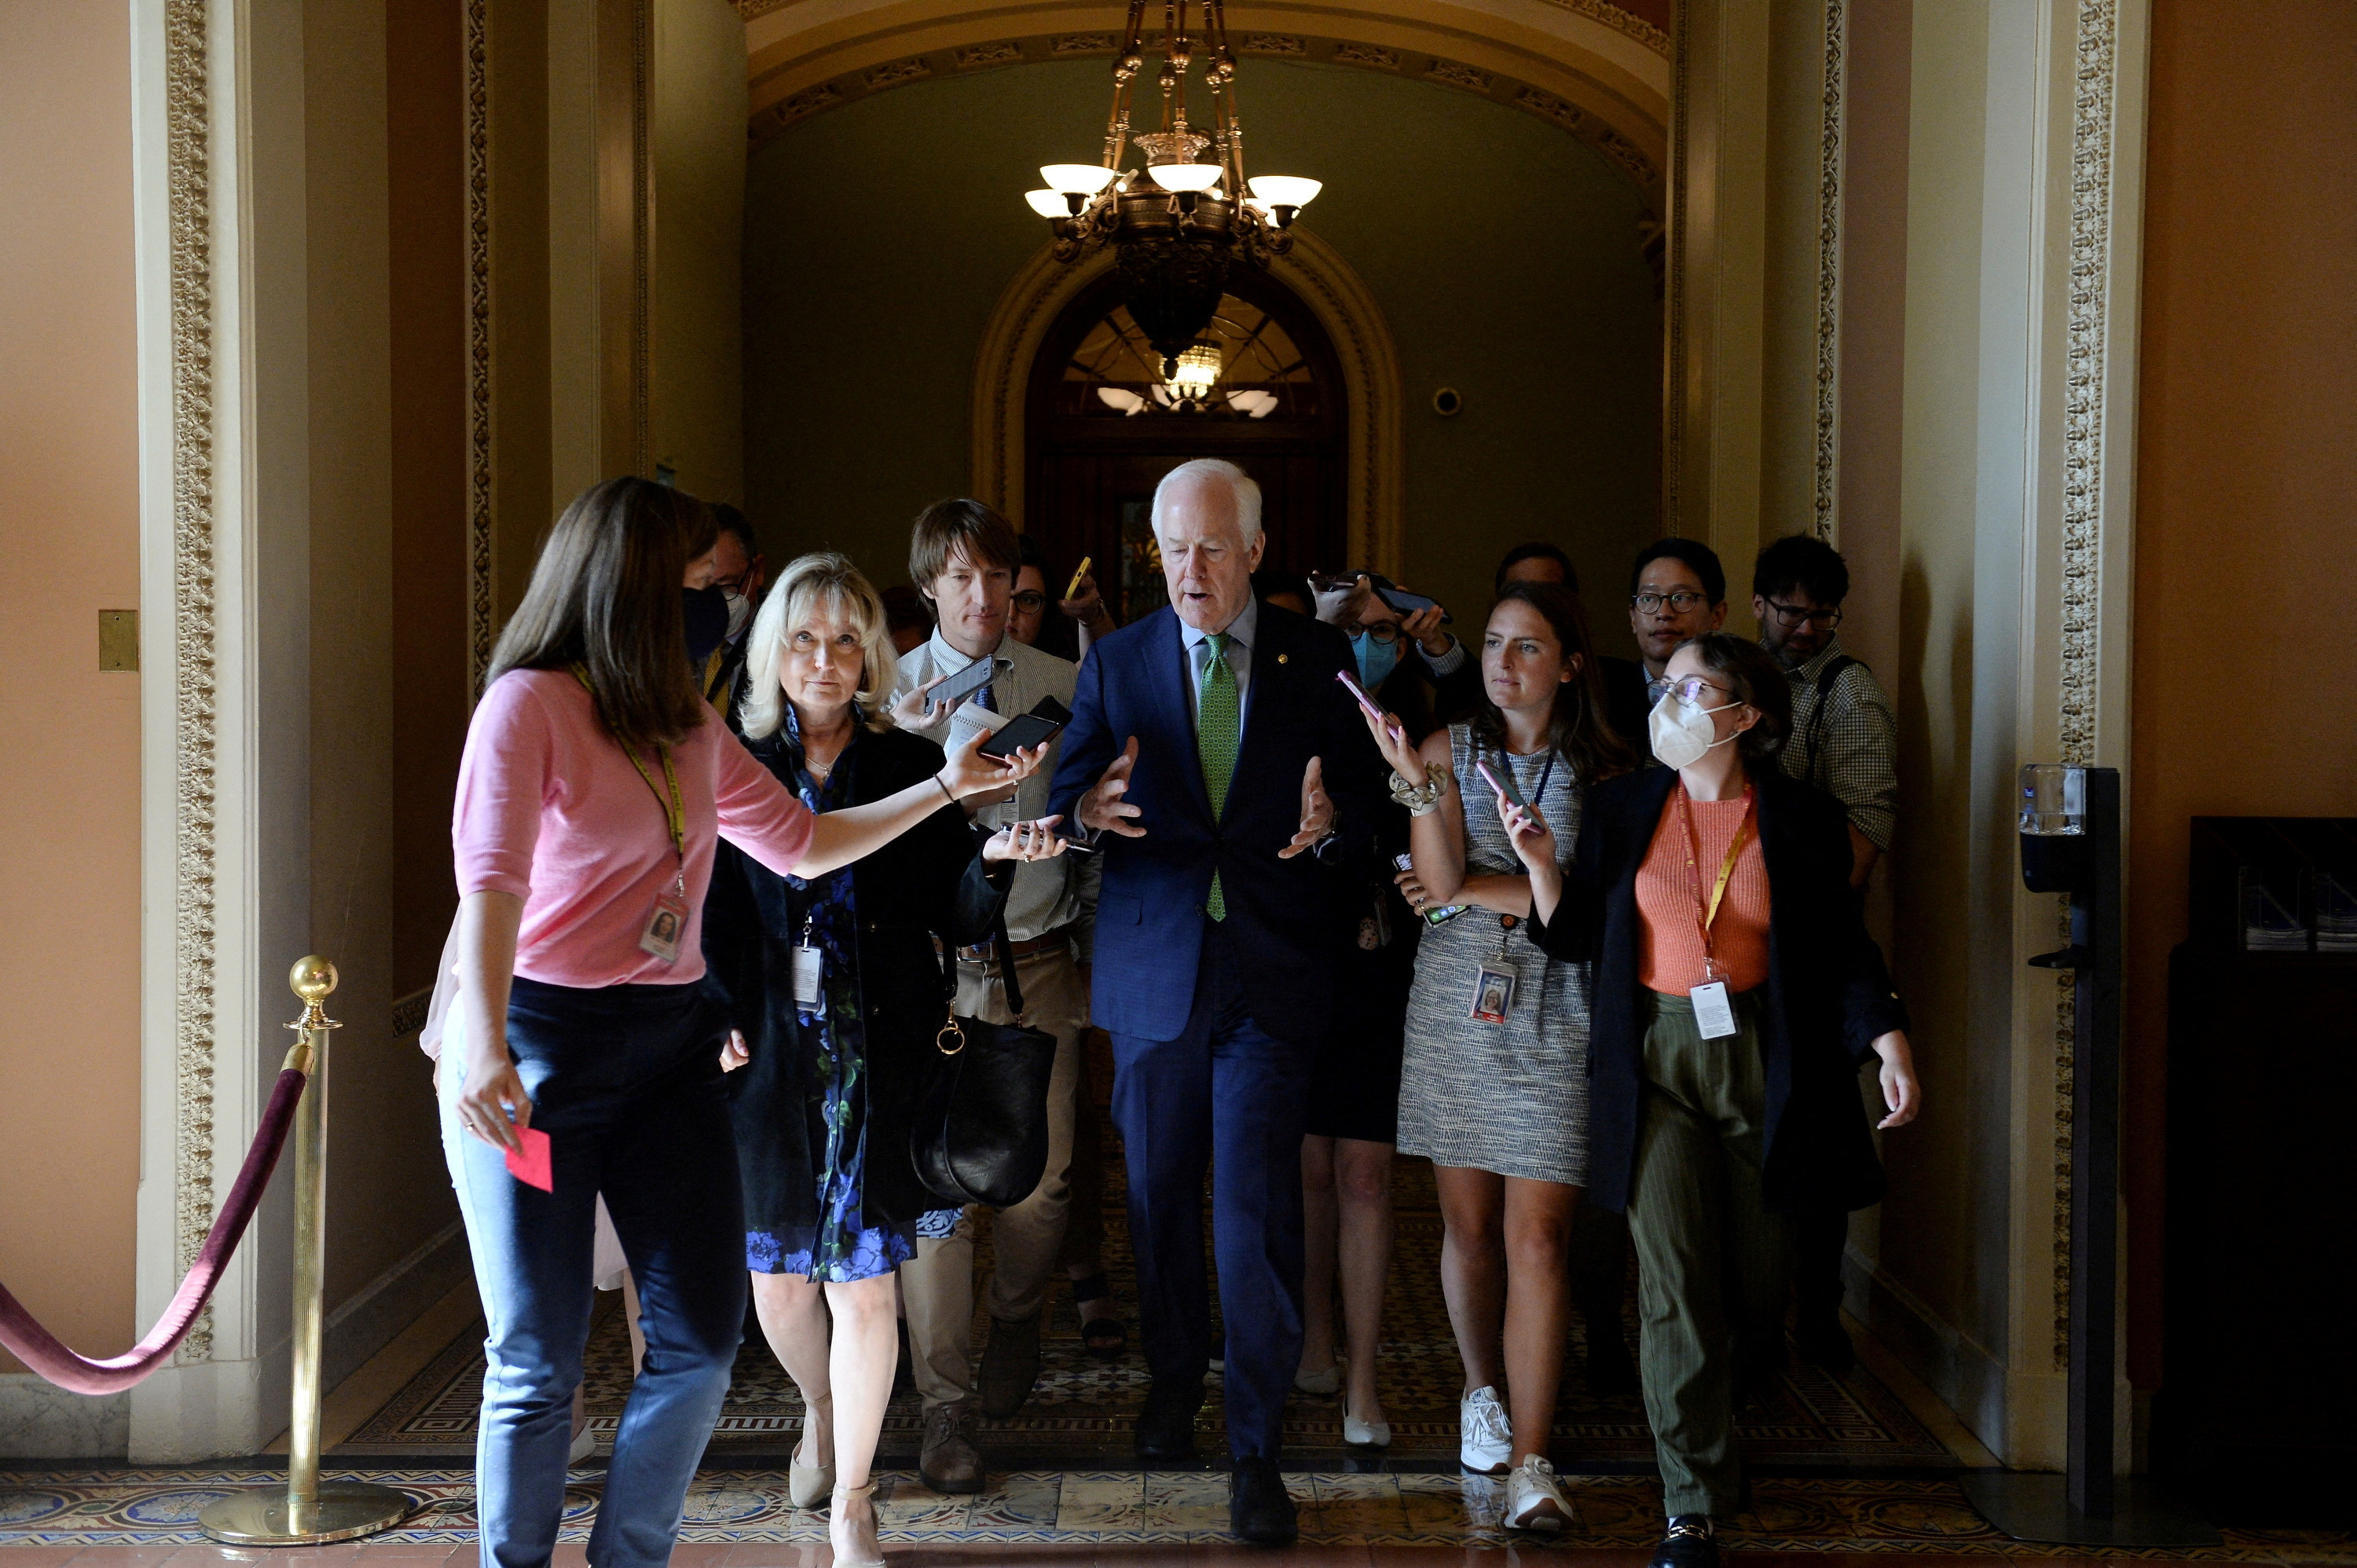 U.S. Sen. John Cornyn (R-TX) is questioned by reporters at the U.S. Capitol